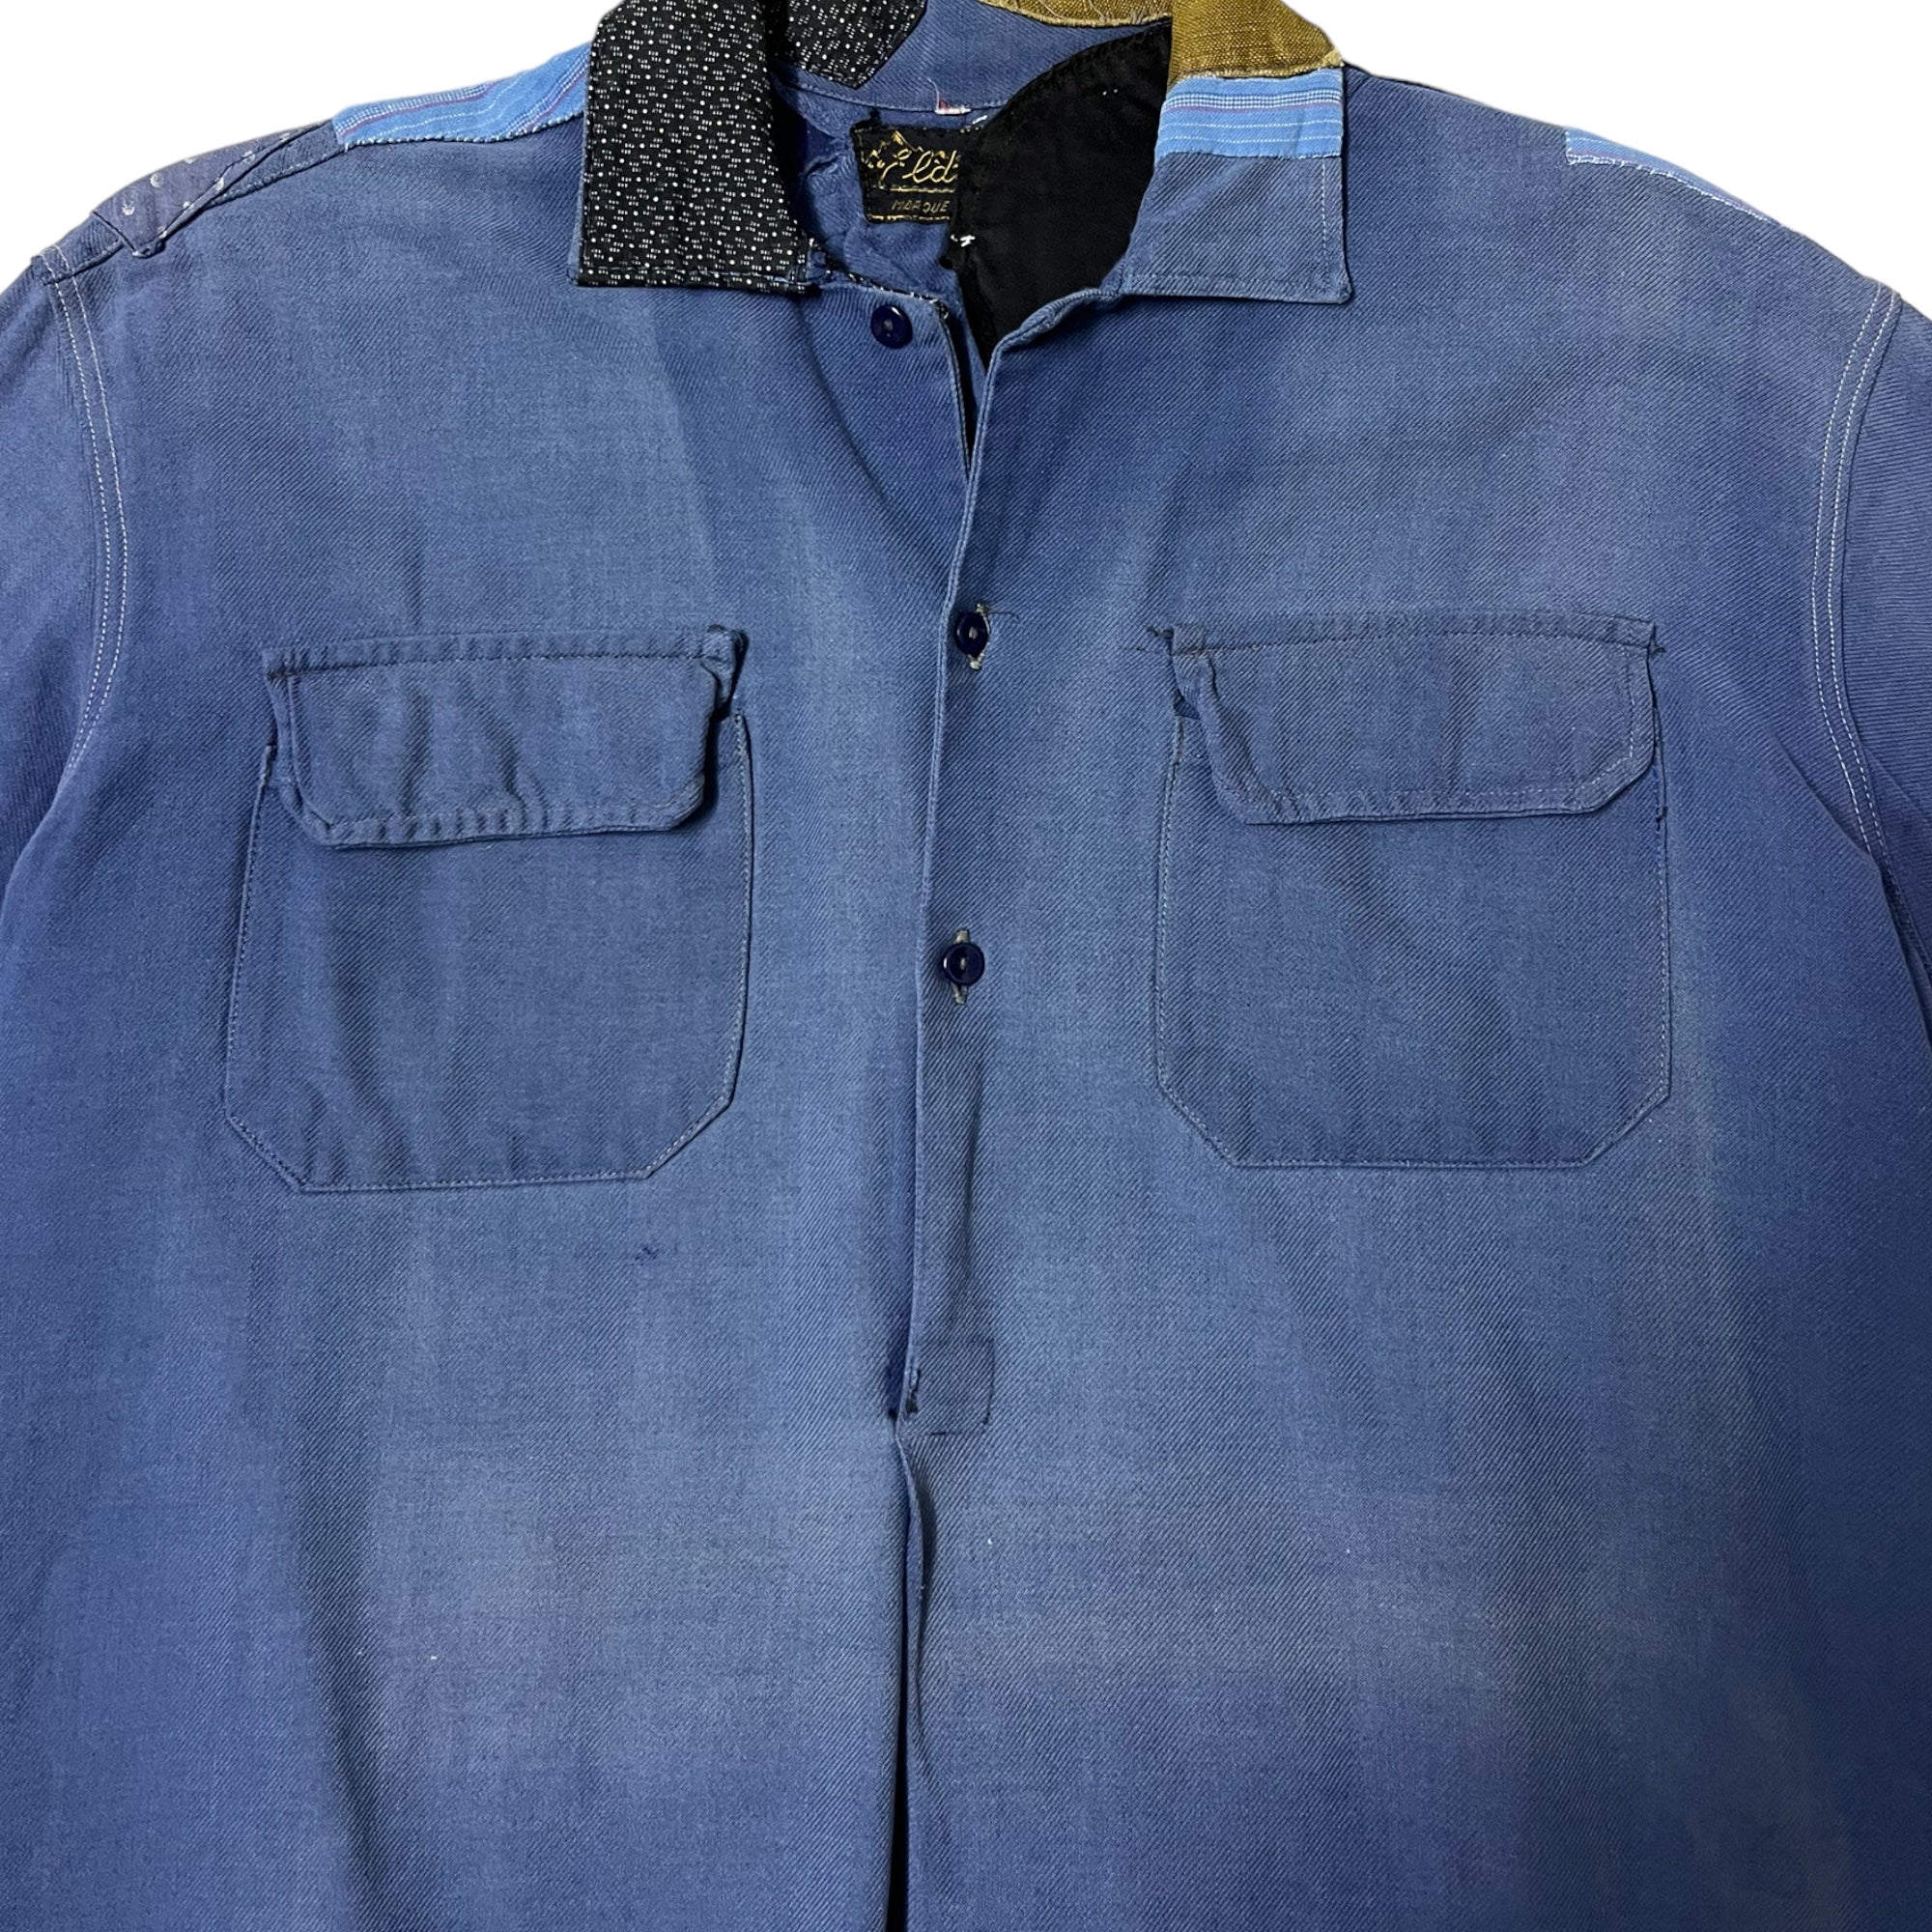 1930s/40s Repaired & Patched French Work Shirt/Smock Shirt - Faded Blue - L